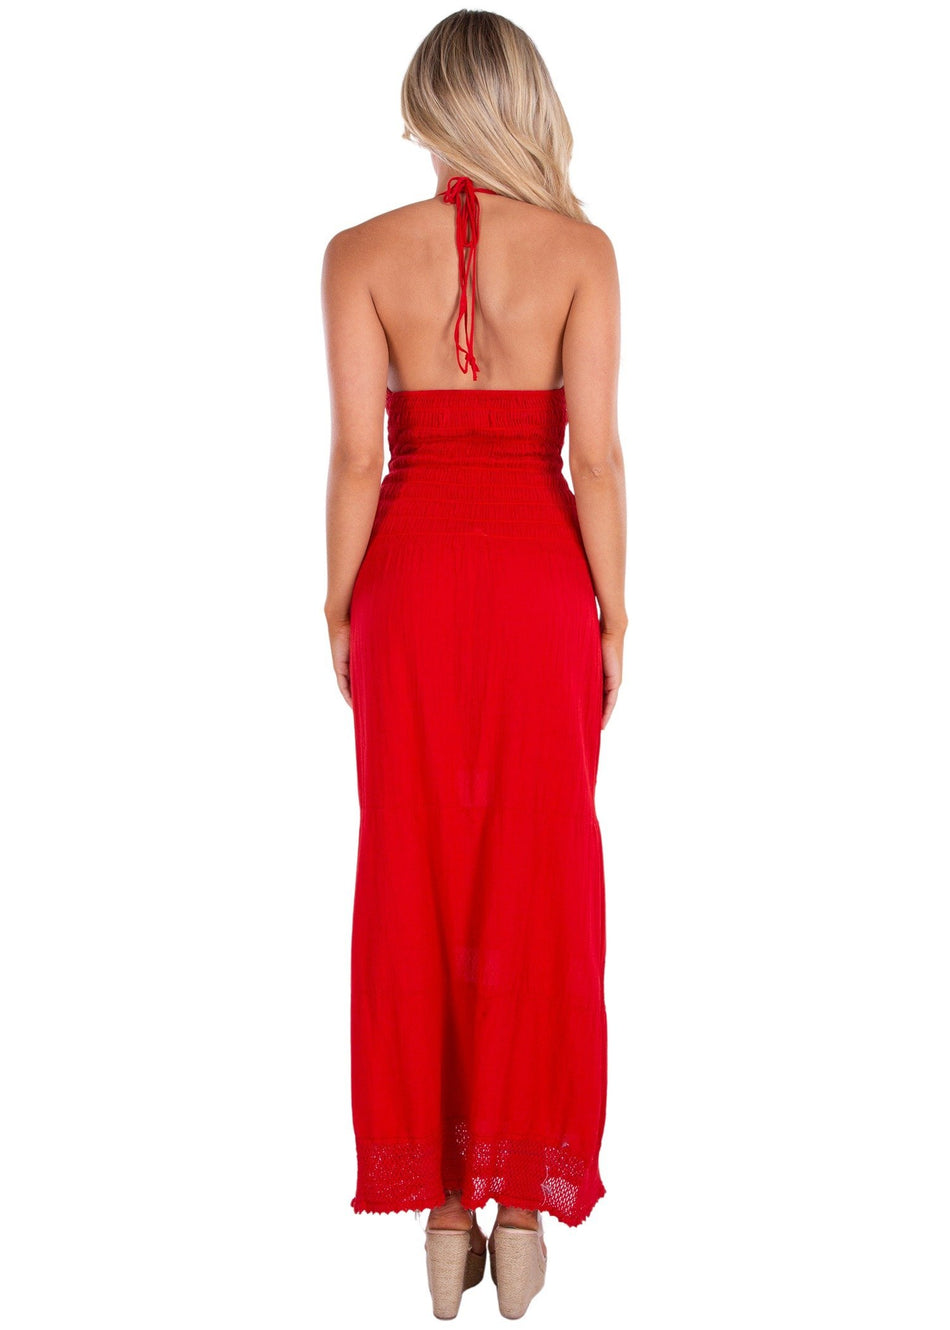 NW1223 - Red Cotton Dress